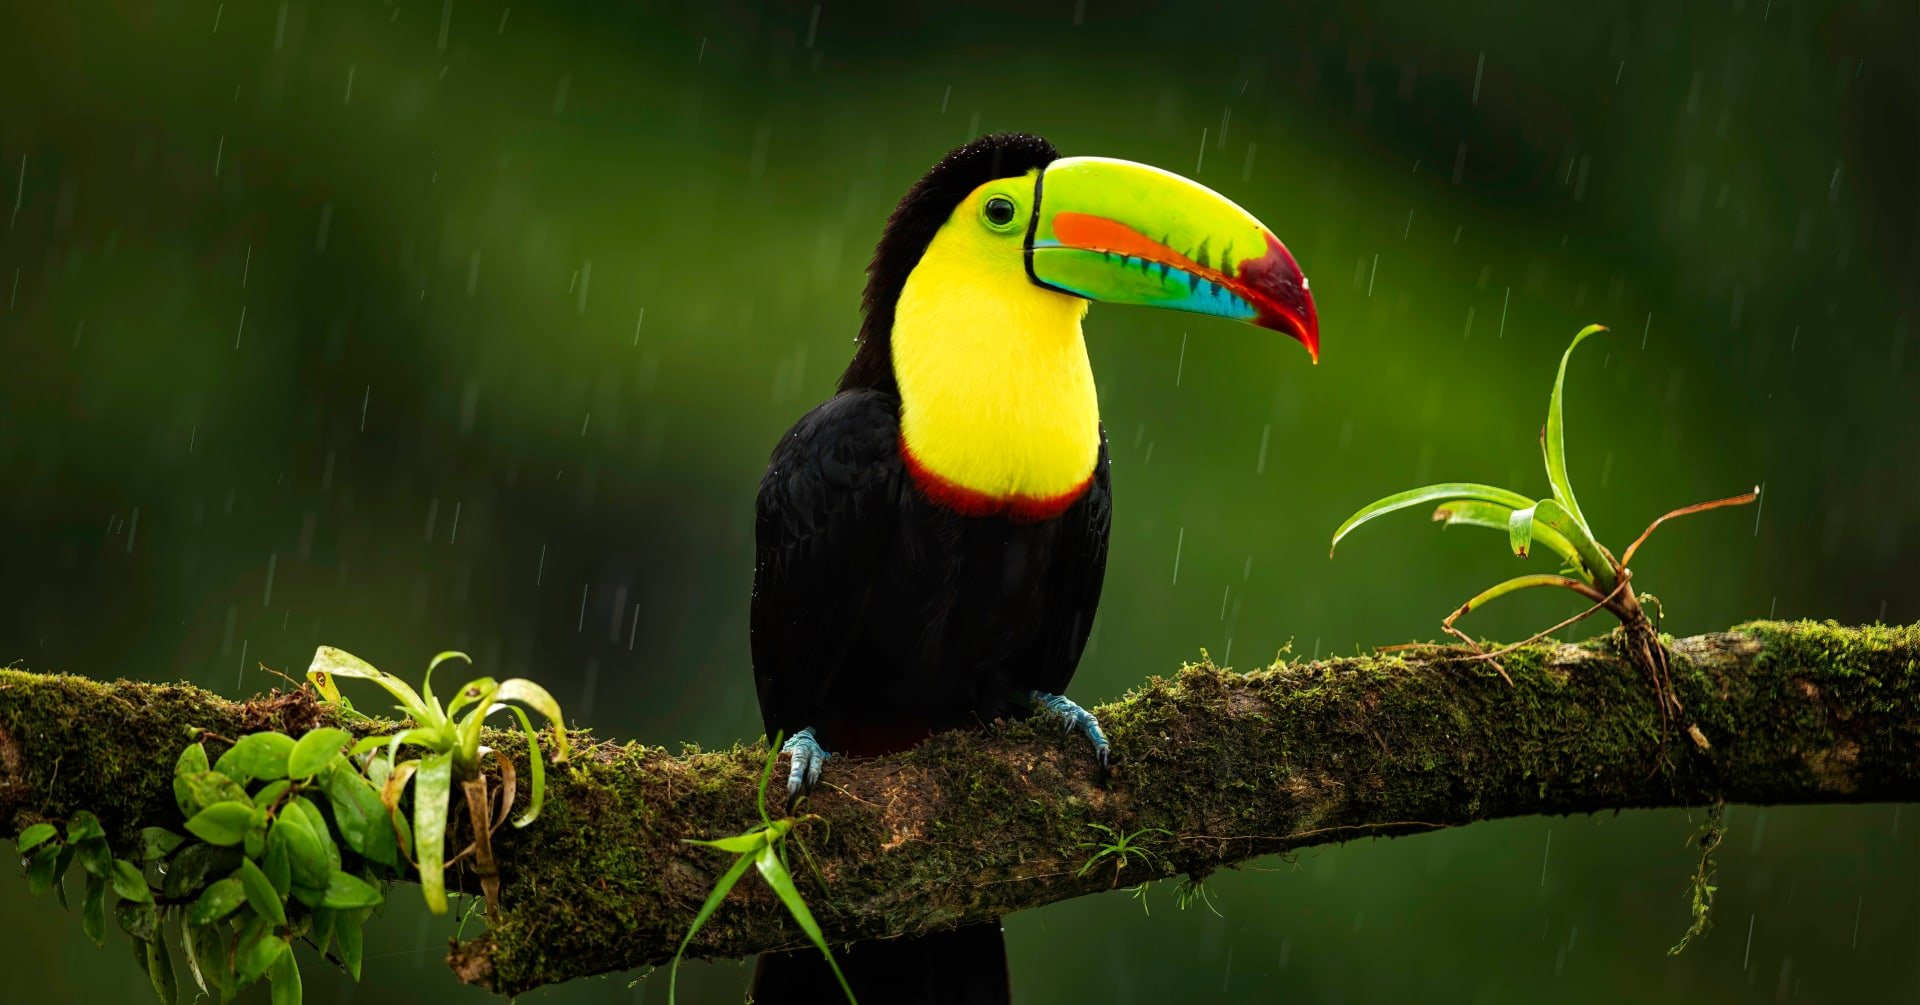 10 of the best places to observe wildlife in Costa Rica